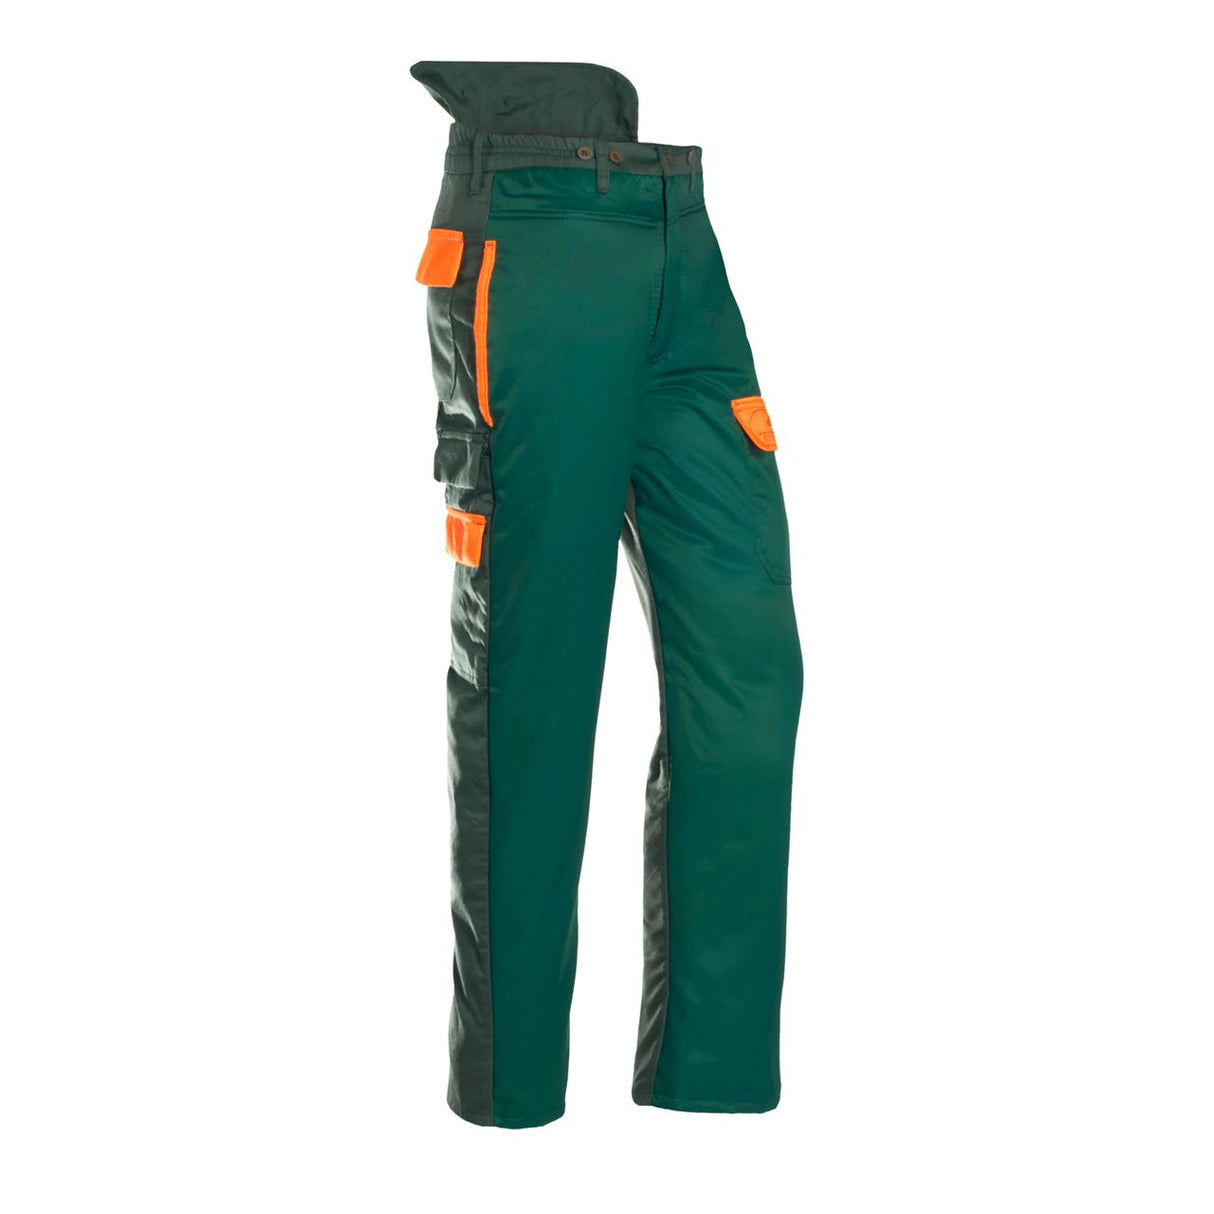 SIP Chainsaw Protection Trousers 1SP7 Green Hi Vis Orange